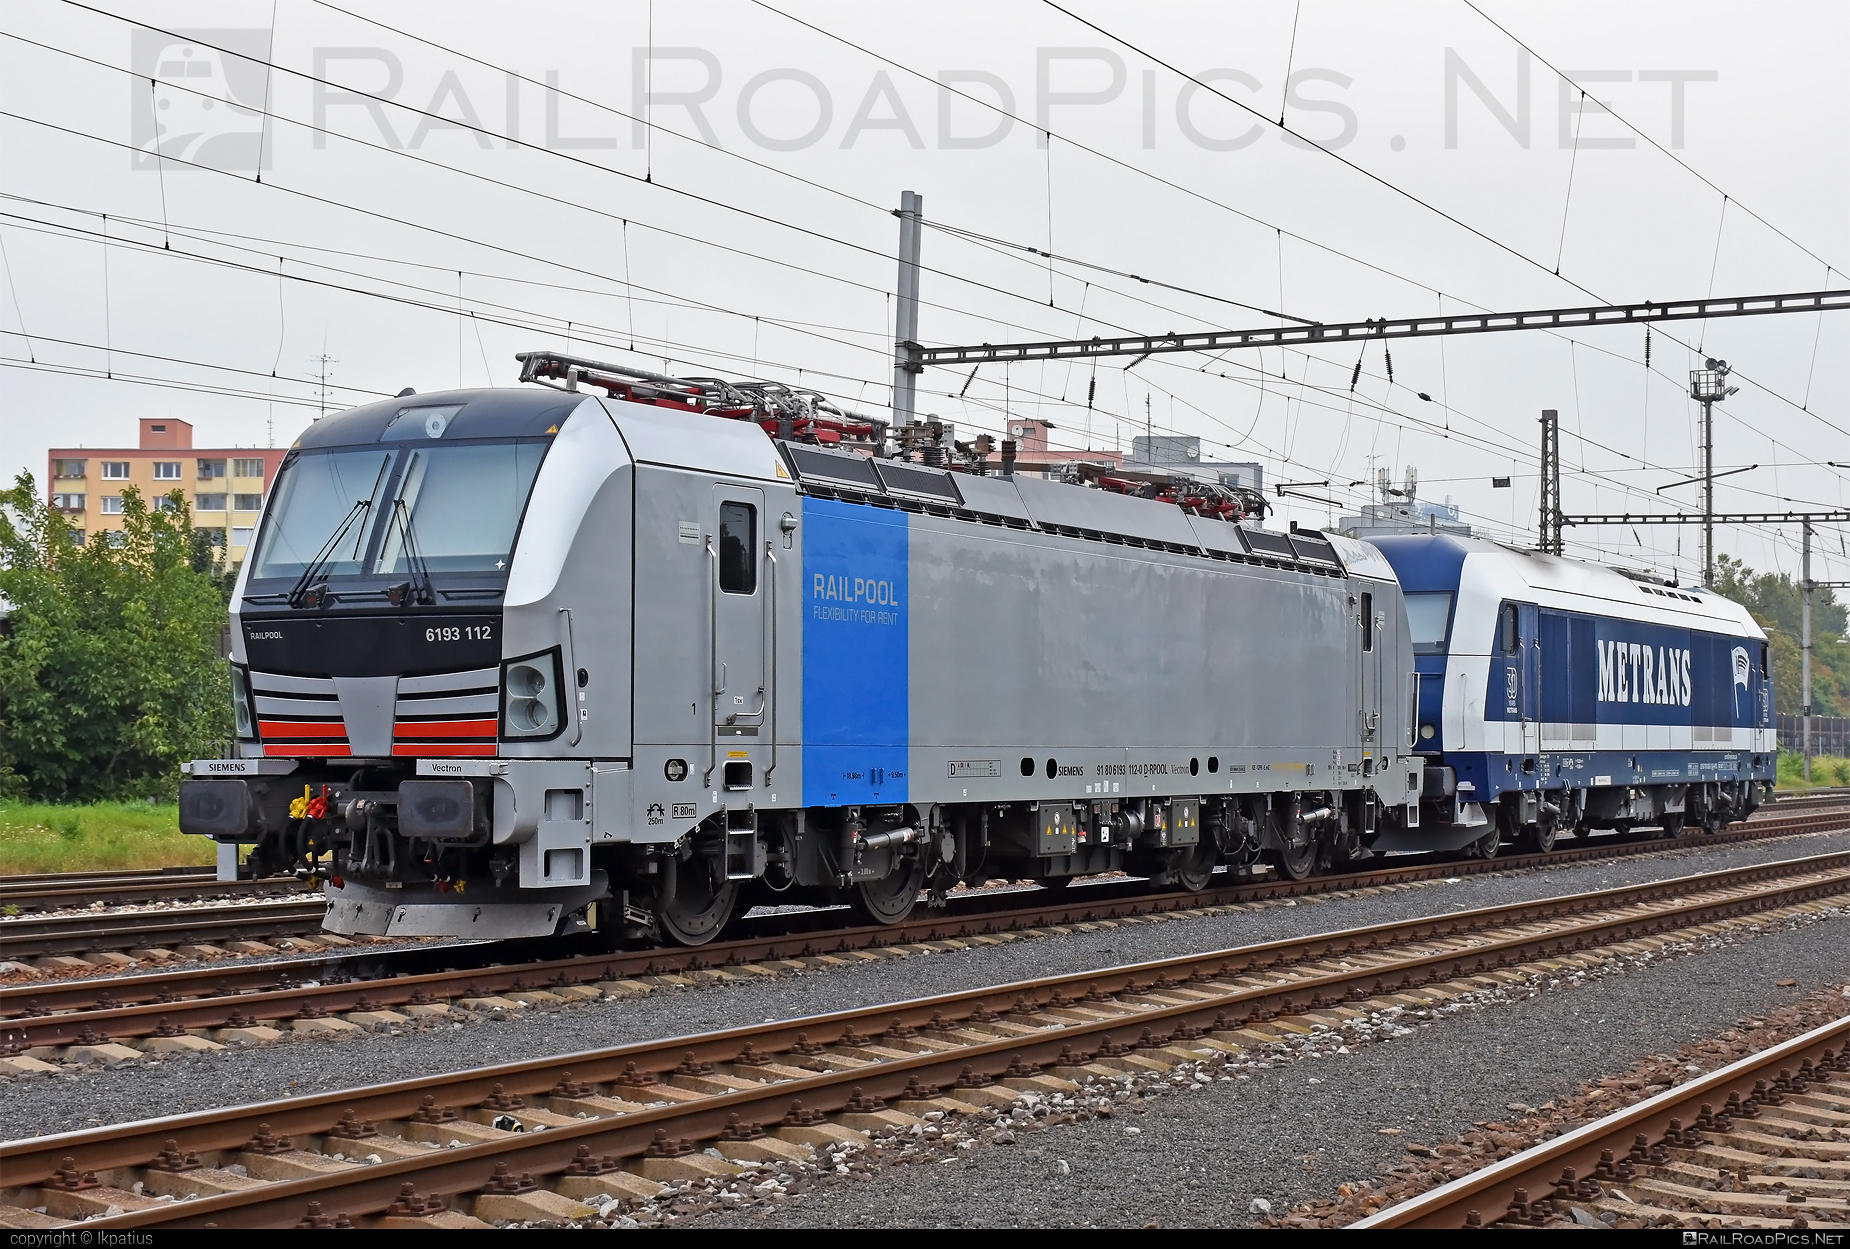 Siemens Vectron MS - 6193 112 operated by HSL Logistik GmbH #hsl #hsllogistic #hsllogisticgmbh #railpool #railpoolgmbh #siemens #siemensVectron #siemensVectronMS #vectron #vectronMS